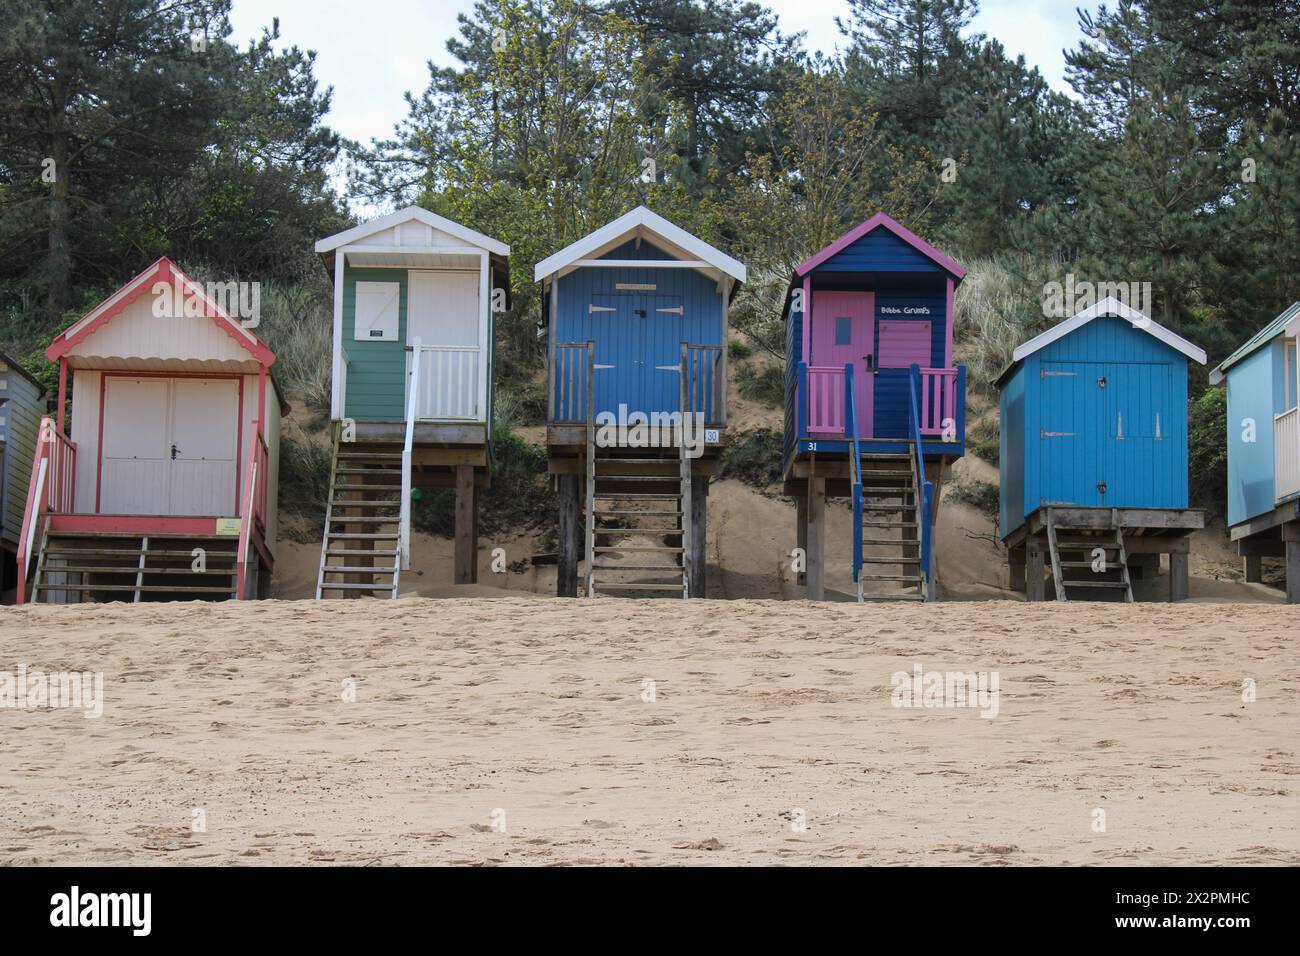 Beach huts on the seafront at Wells next the sea, Norfolk, UK Stock Photo